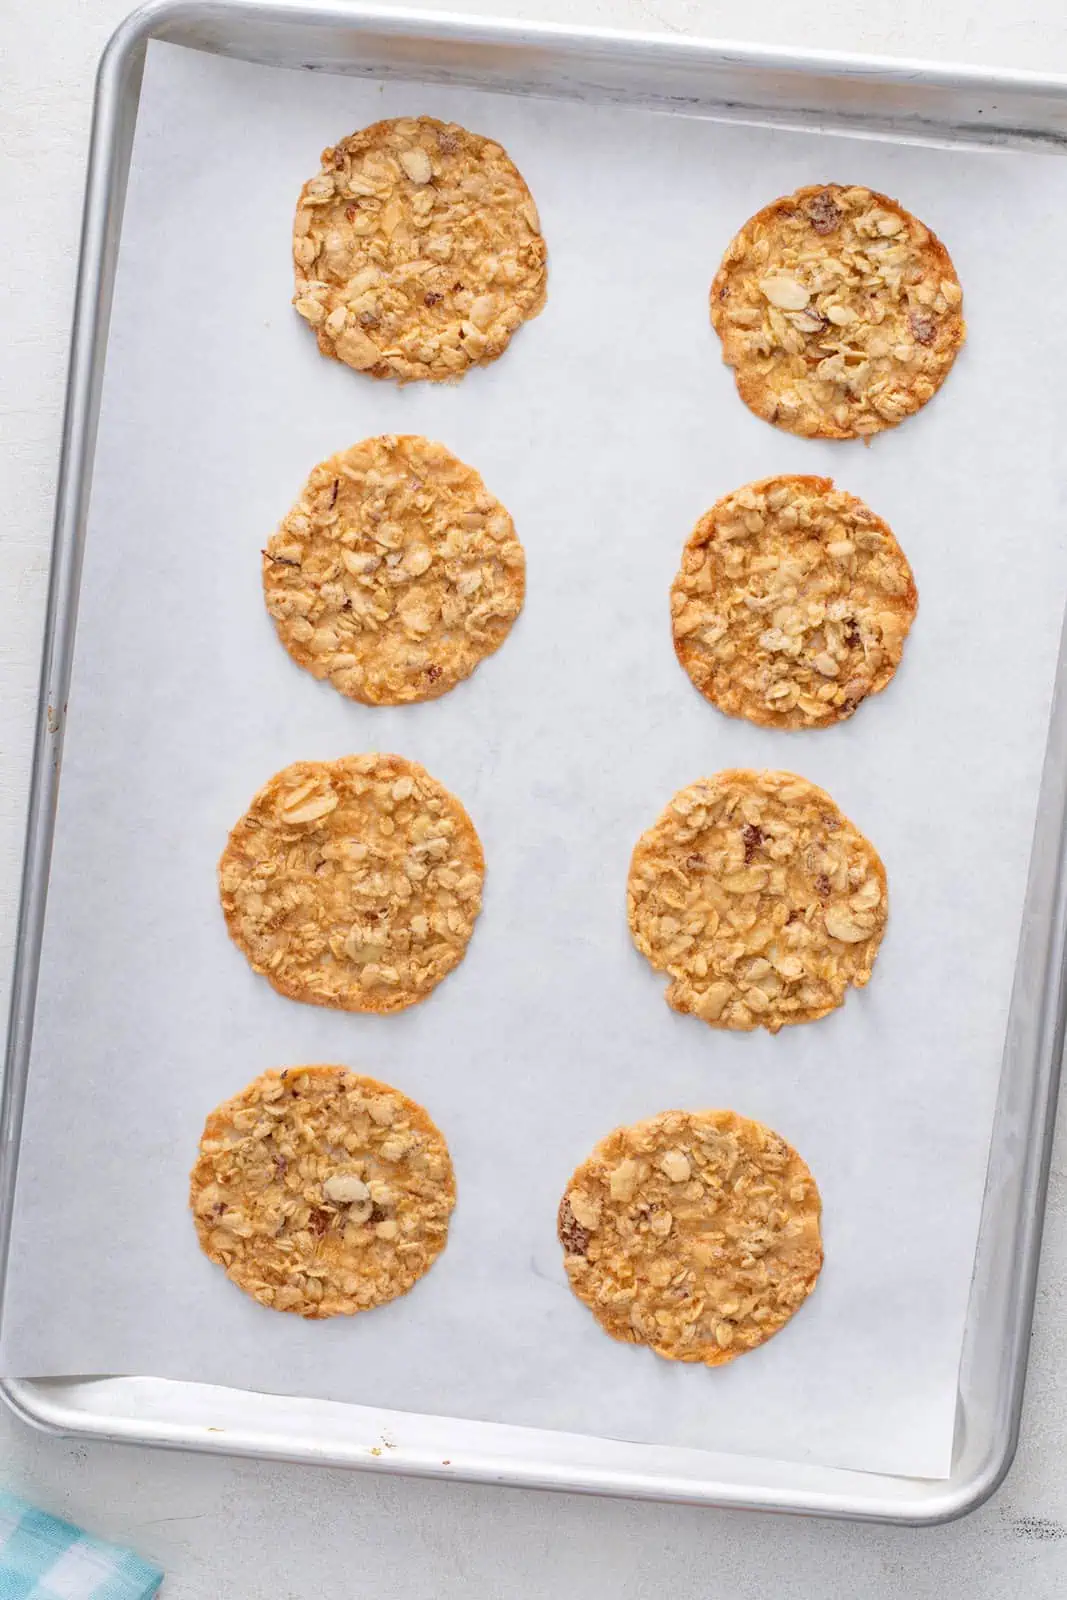 Baked almond lace cookies cooling on a parchment-lined baking sheet.